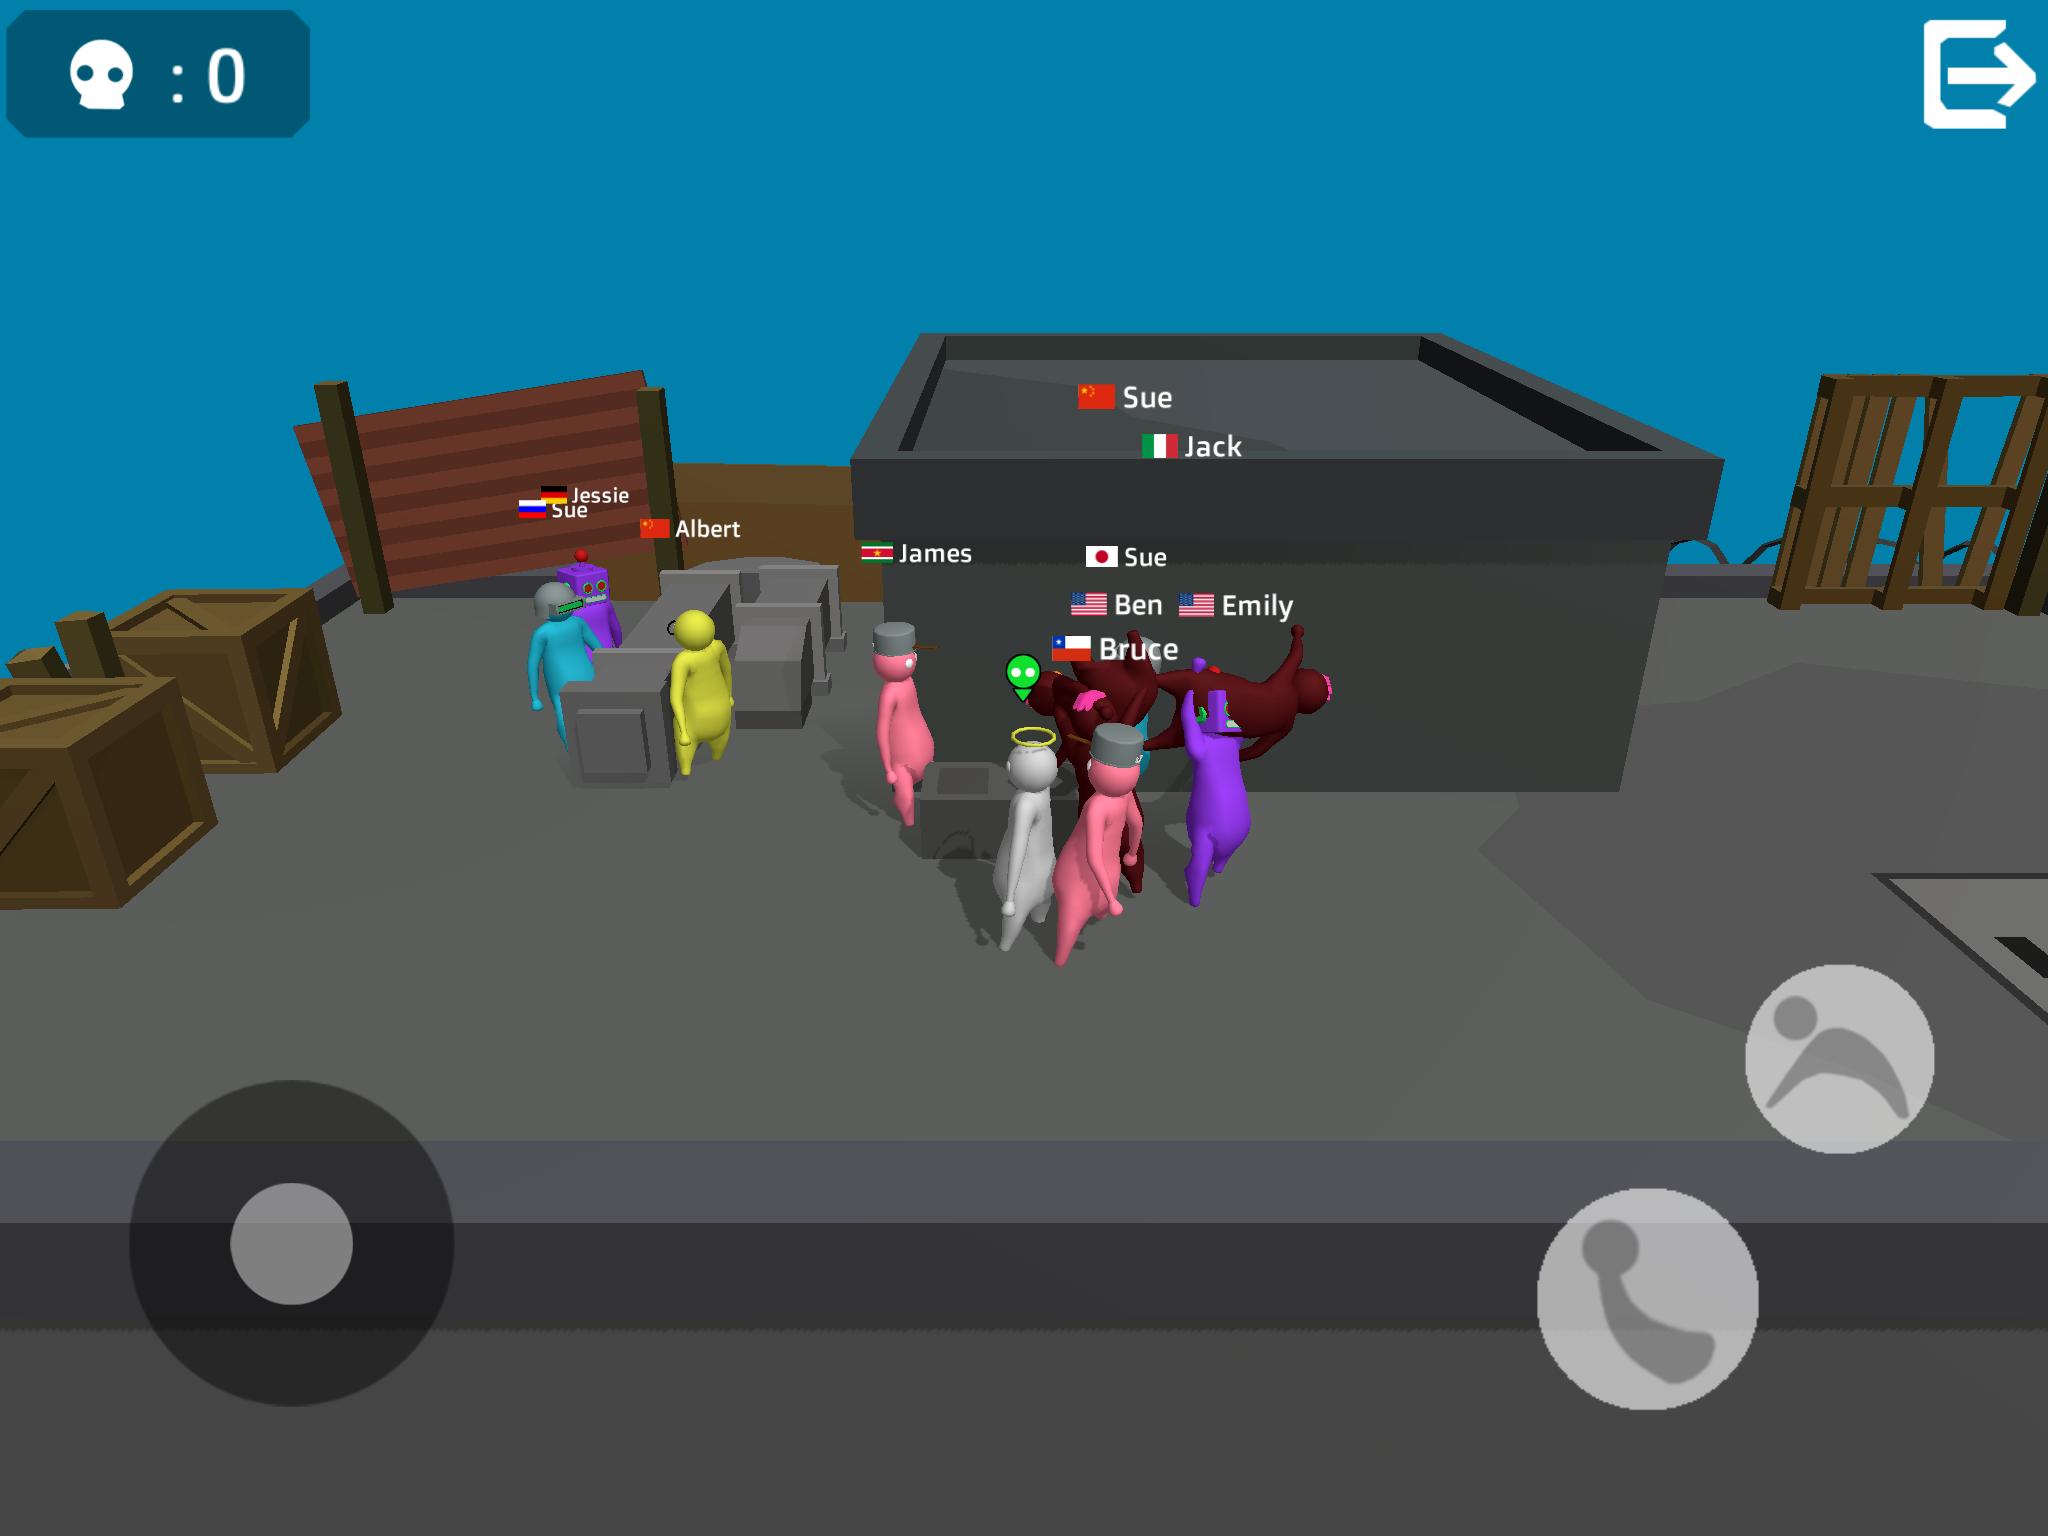 Noodleman.io - Fight Party Games 3.3 Screenshot 11